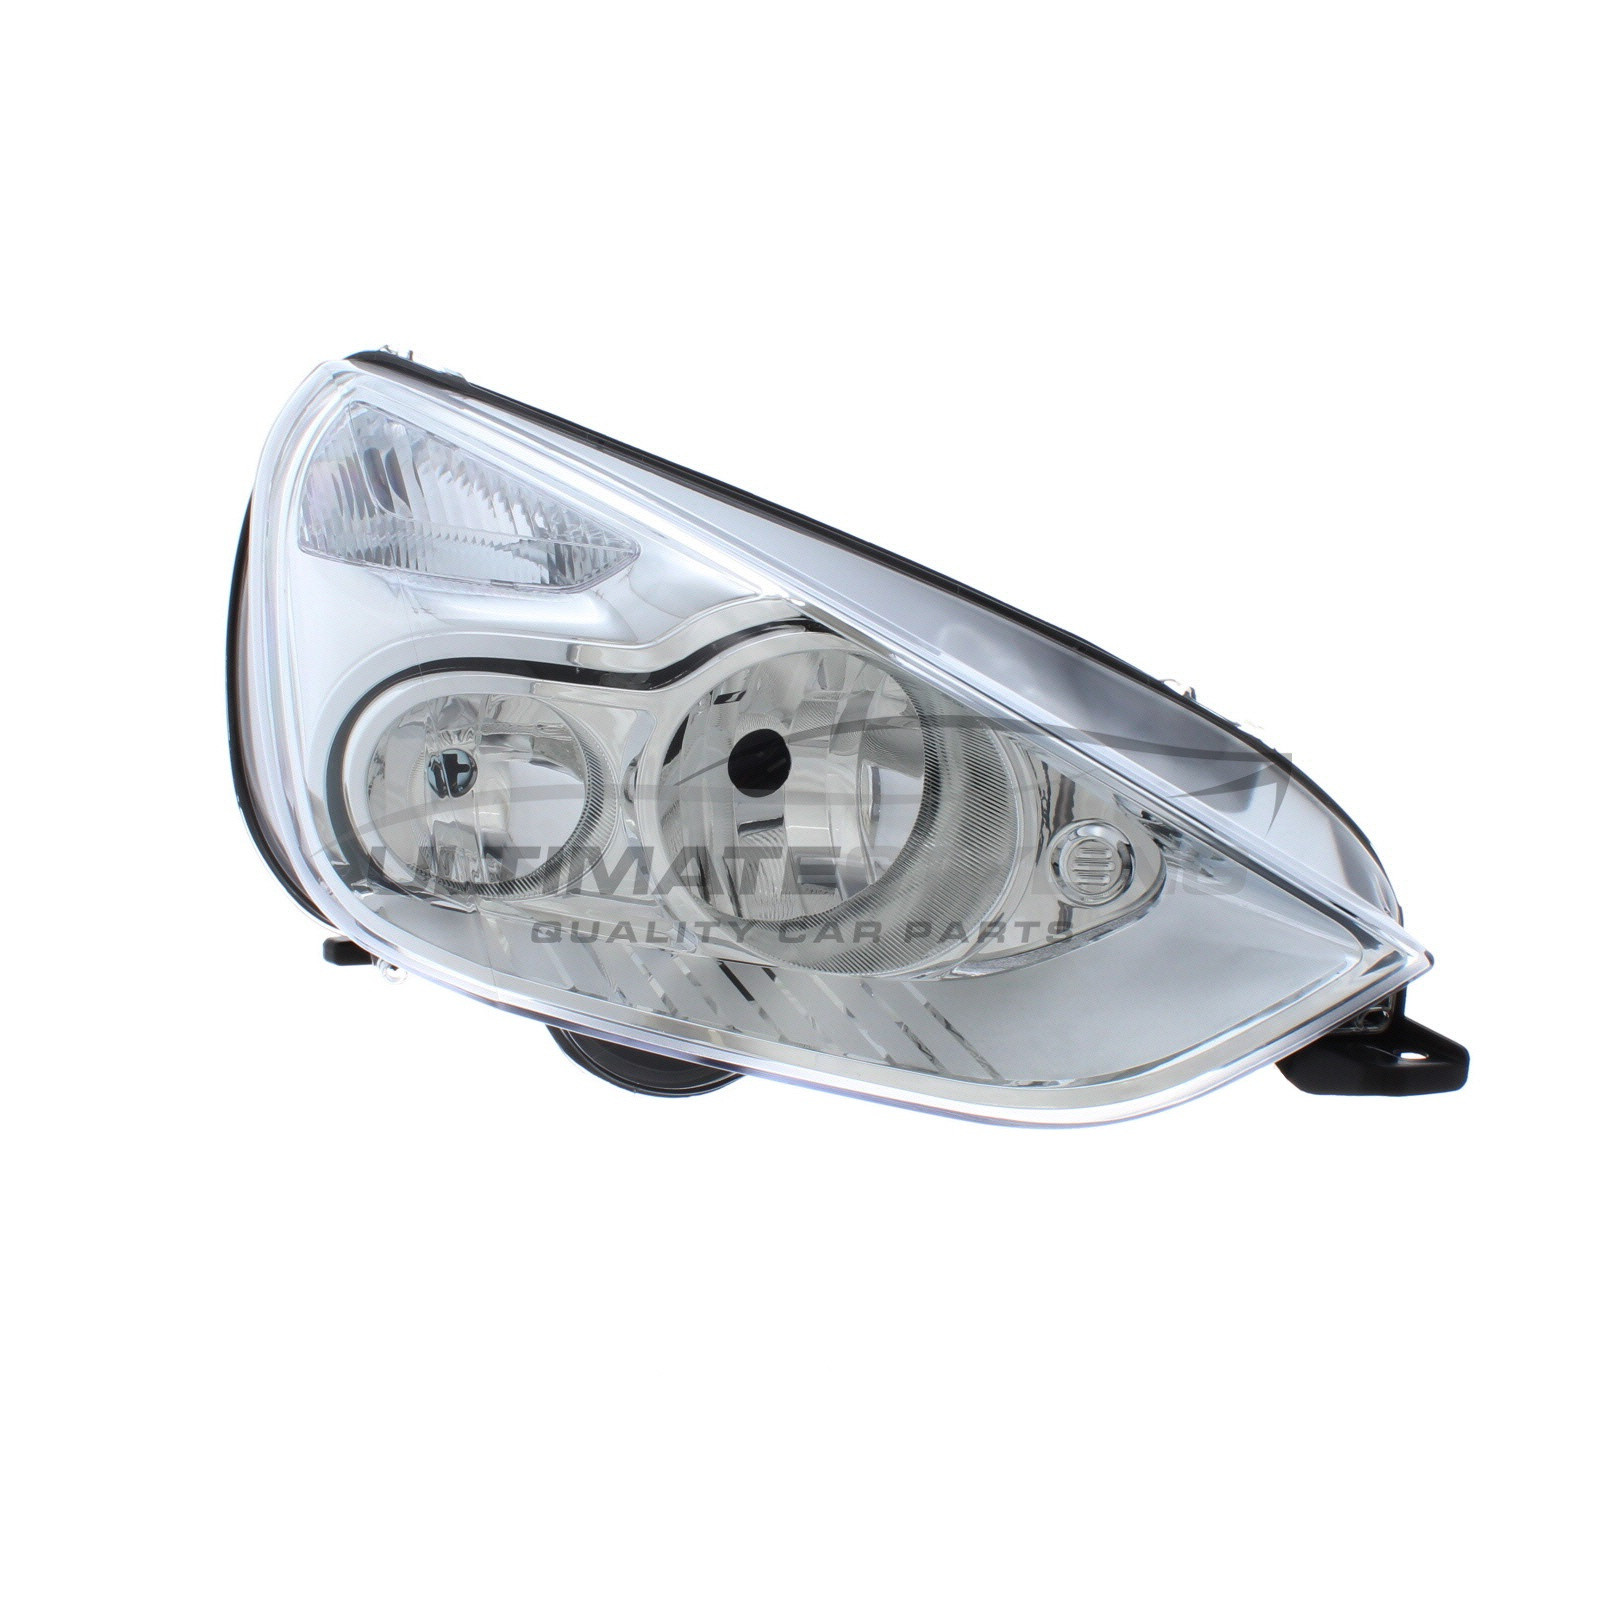 Headlight / Headlamp for Ford S-MAX